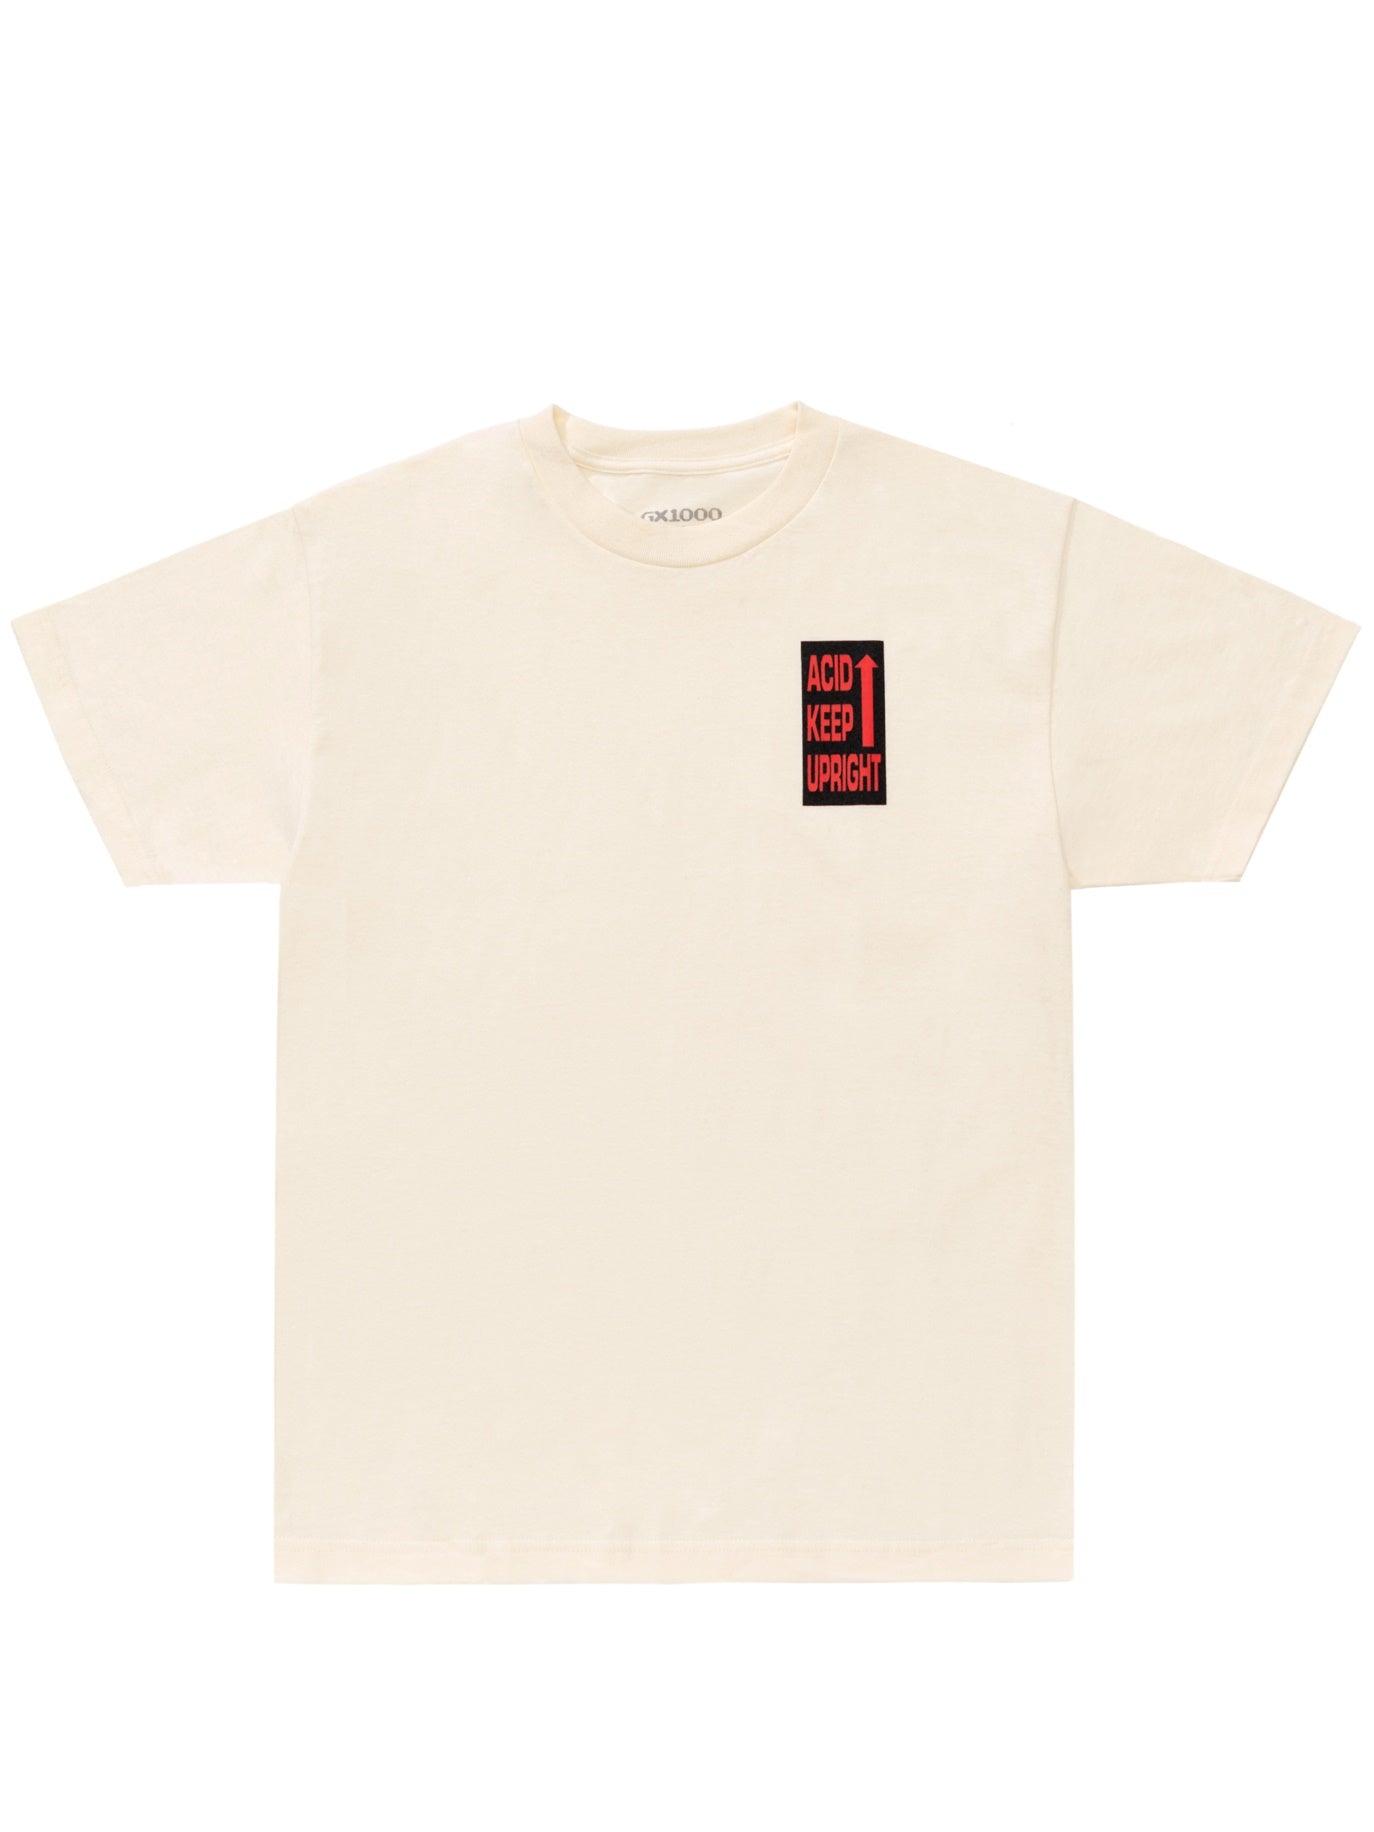 GX1000 Up Right Tee - Creme